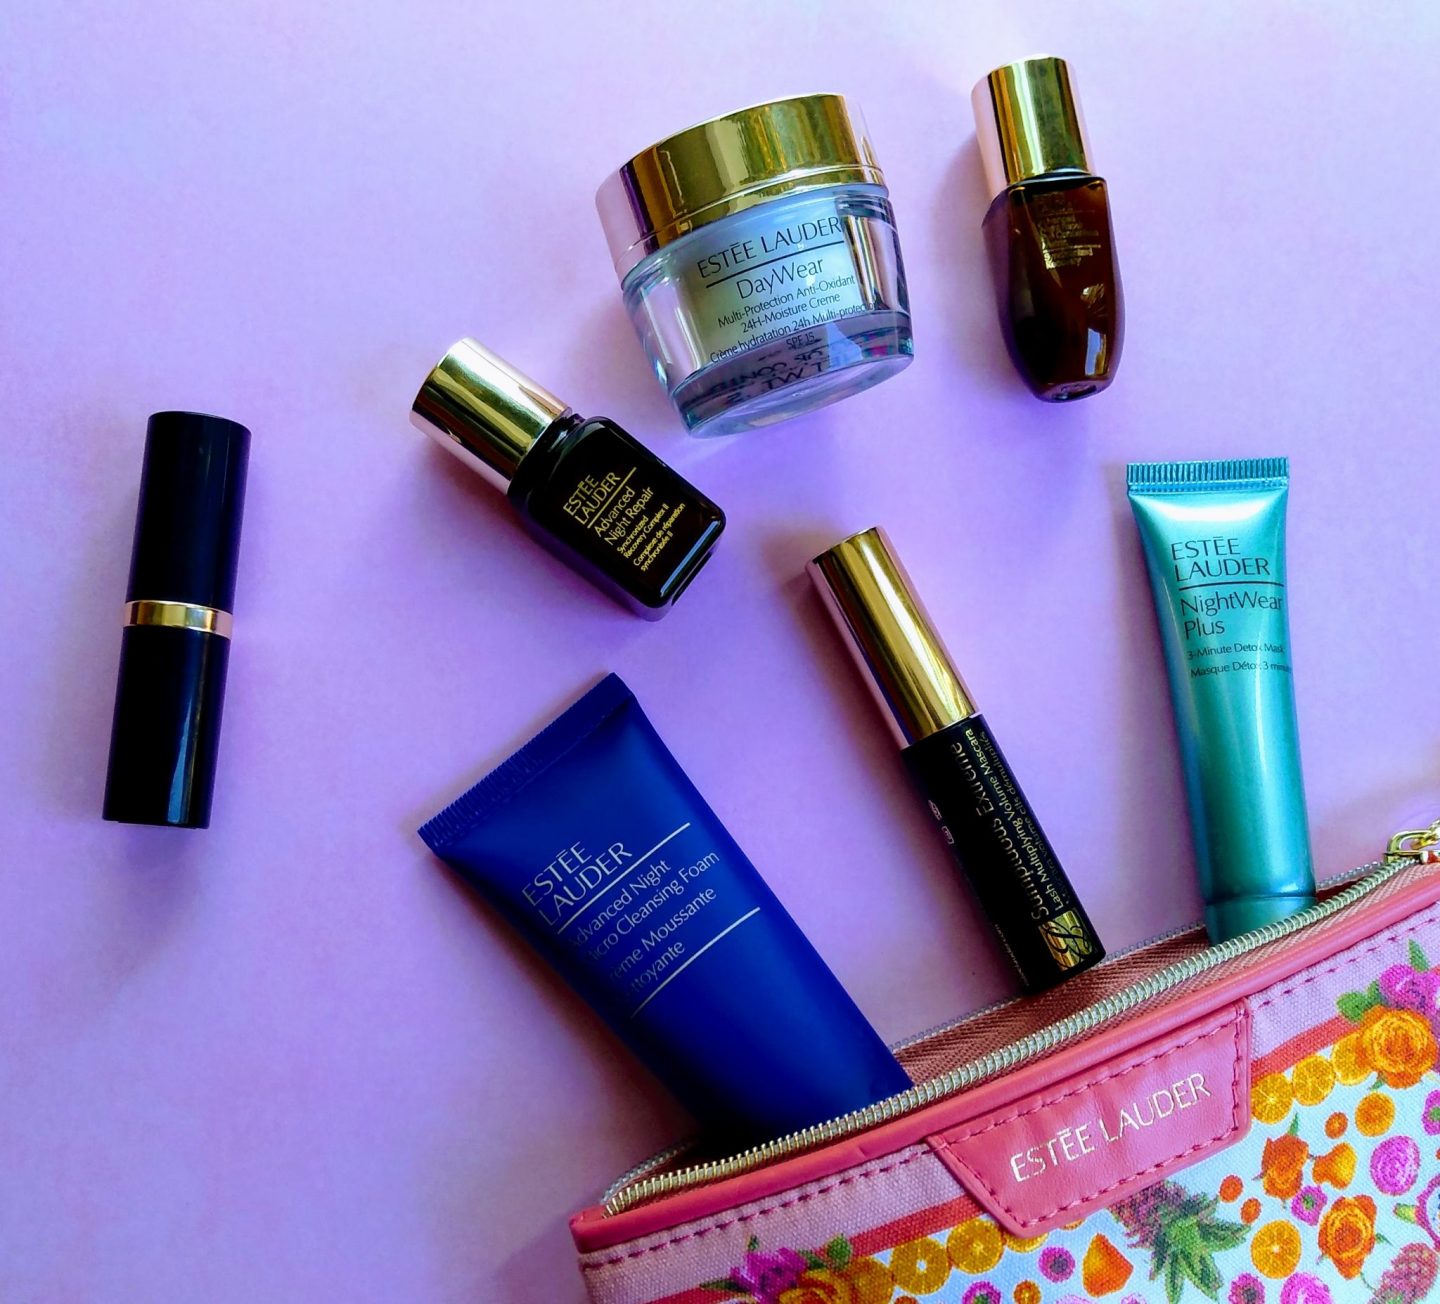 Estee Lauder Spring 2019 Gift Review